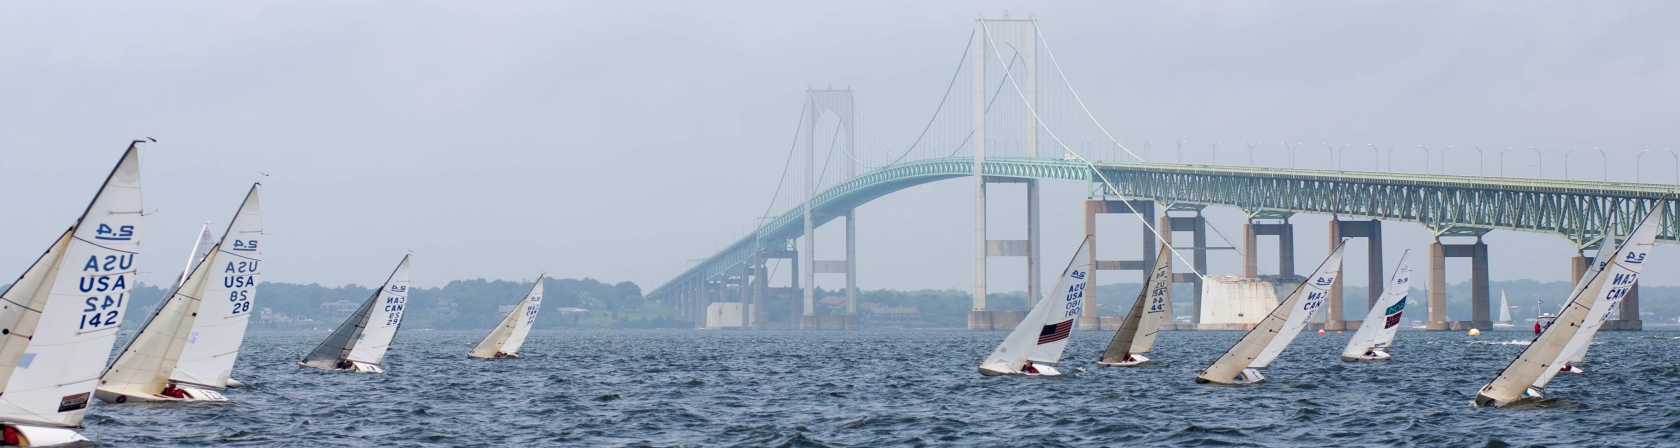 The Clagett fleet of 2.4mRs sail upwind with the Newport Bridge in the background